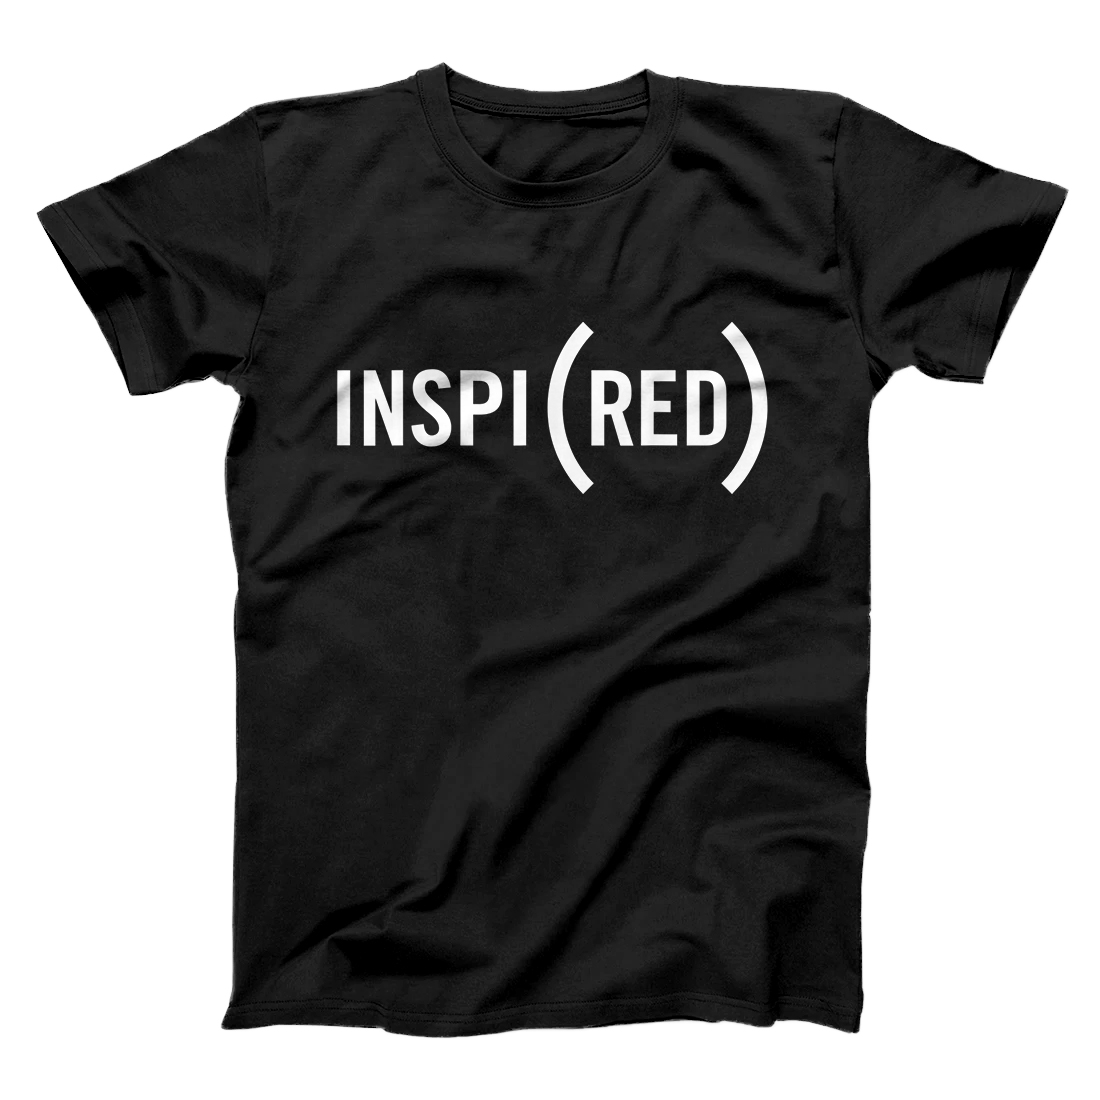 Personalized (RED) Originals INSPI(RED) T-Shirt